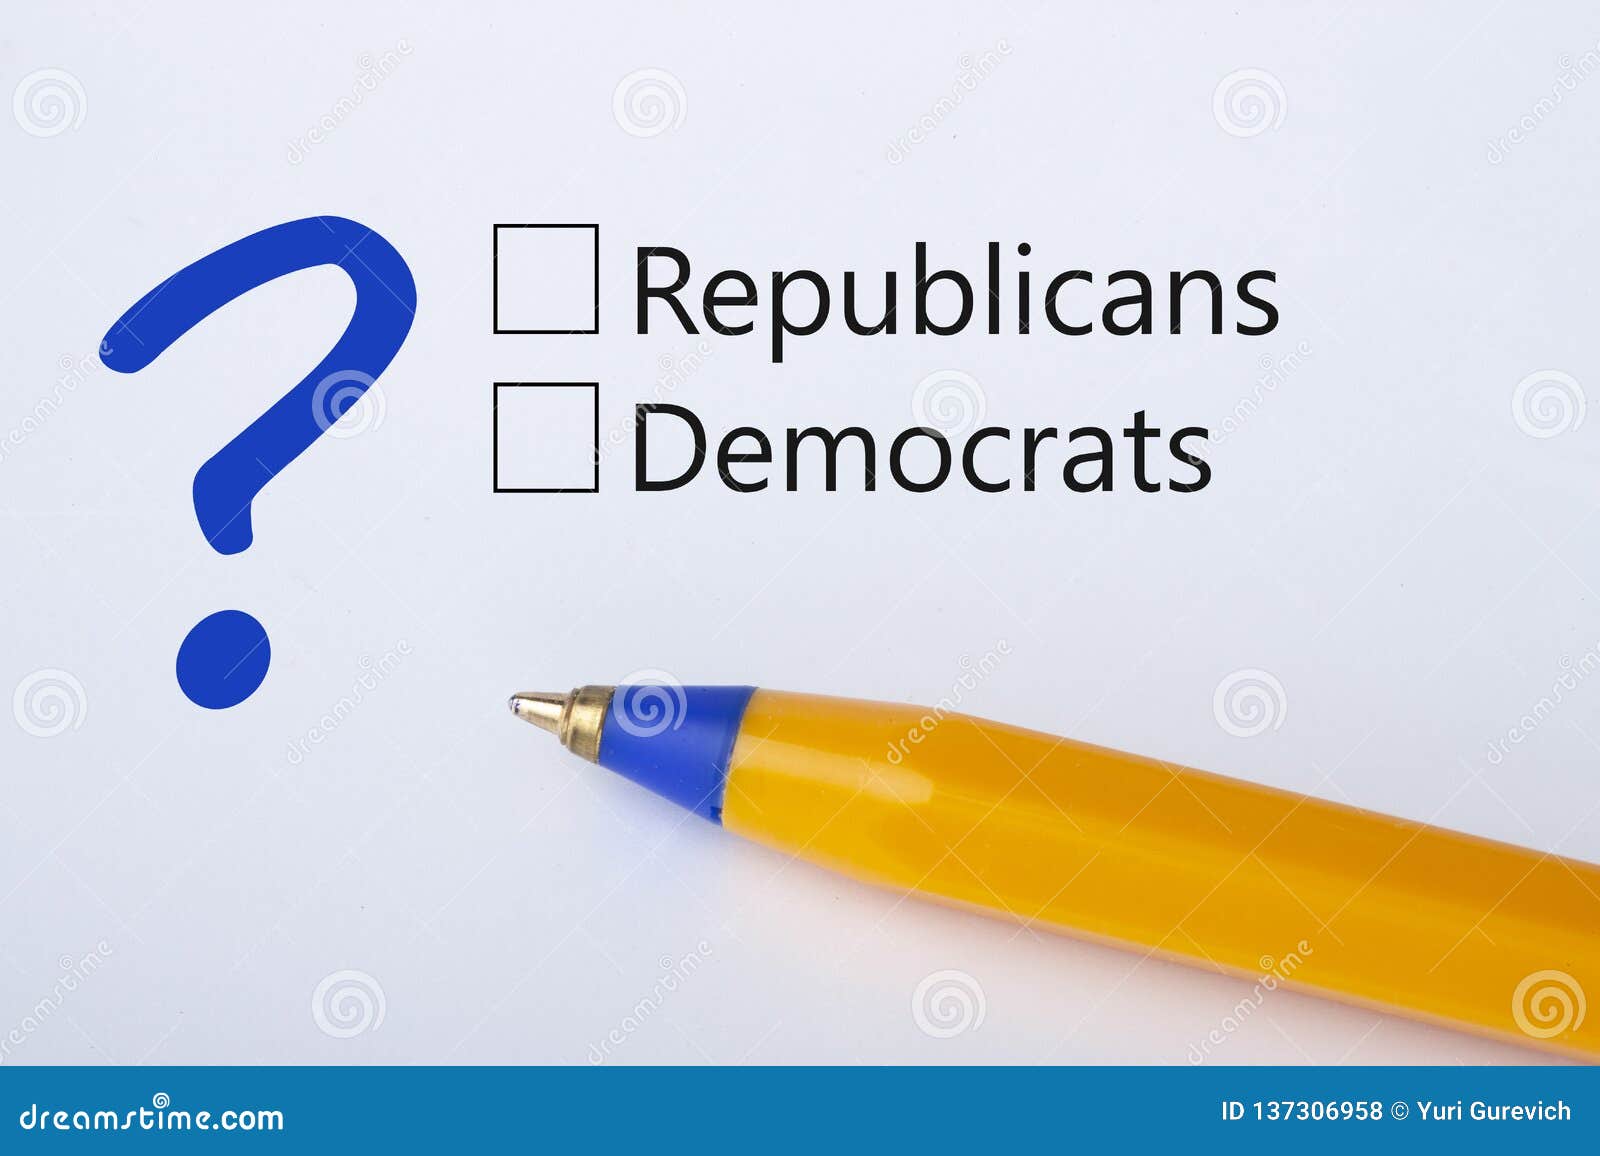 republicans or democrats - checkbox with a tick on white paper with yellow pen. checklist concept